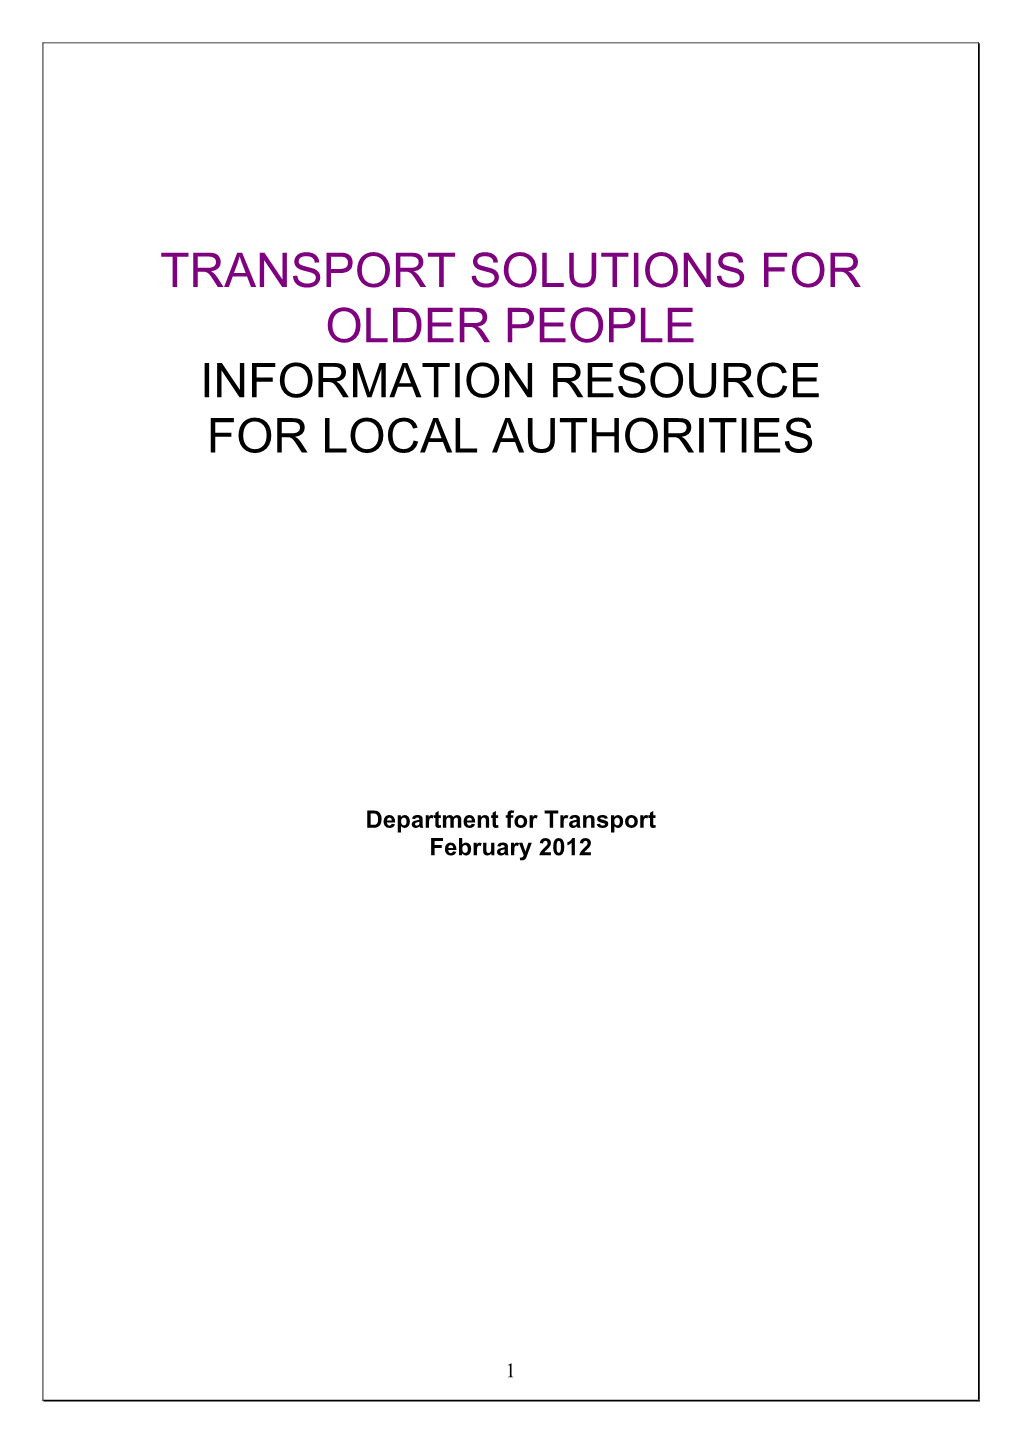 Transport Solutions for Older People Information Resource for Local Authorities